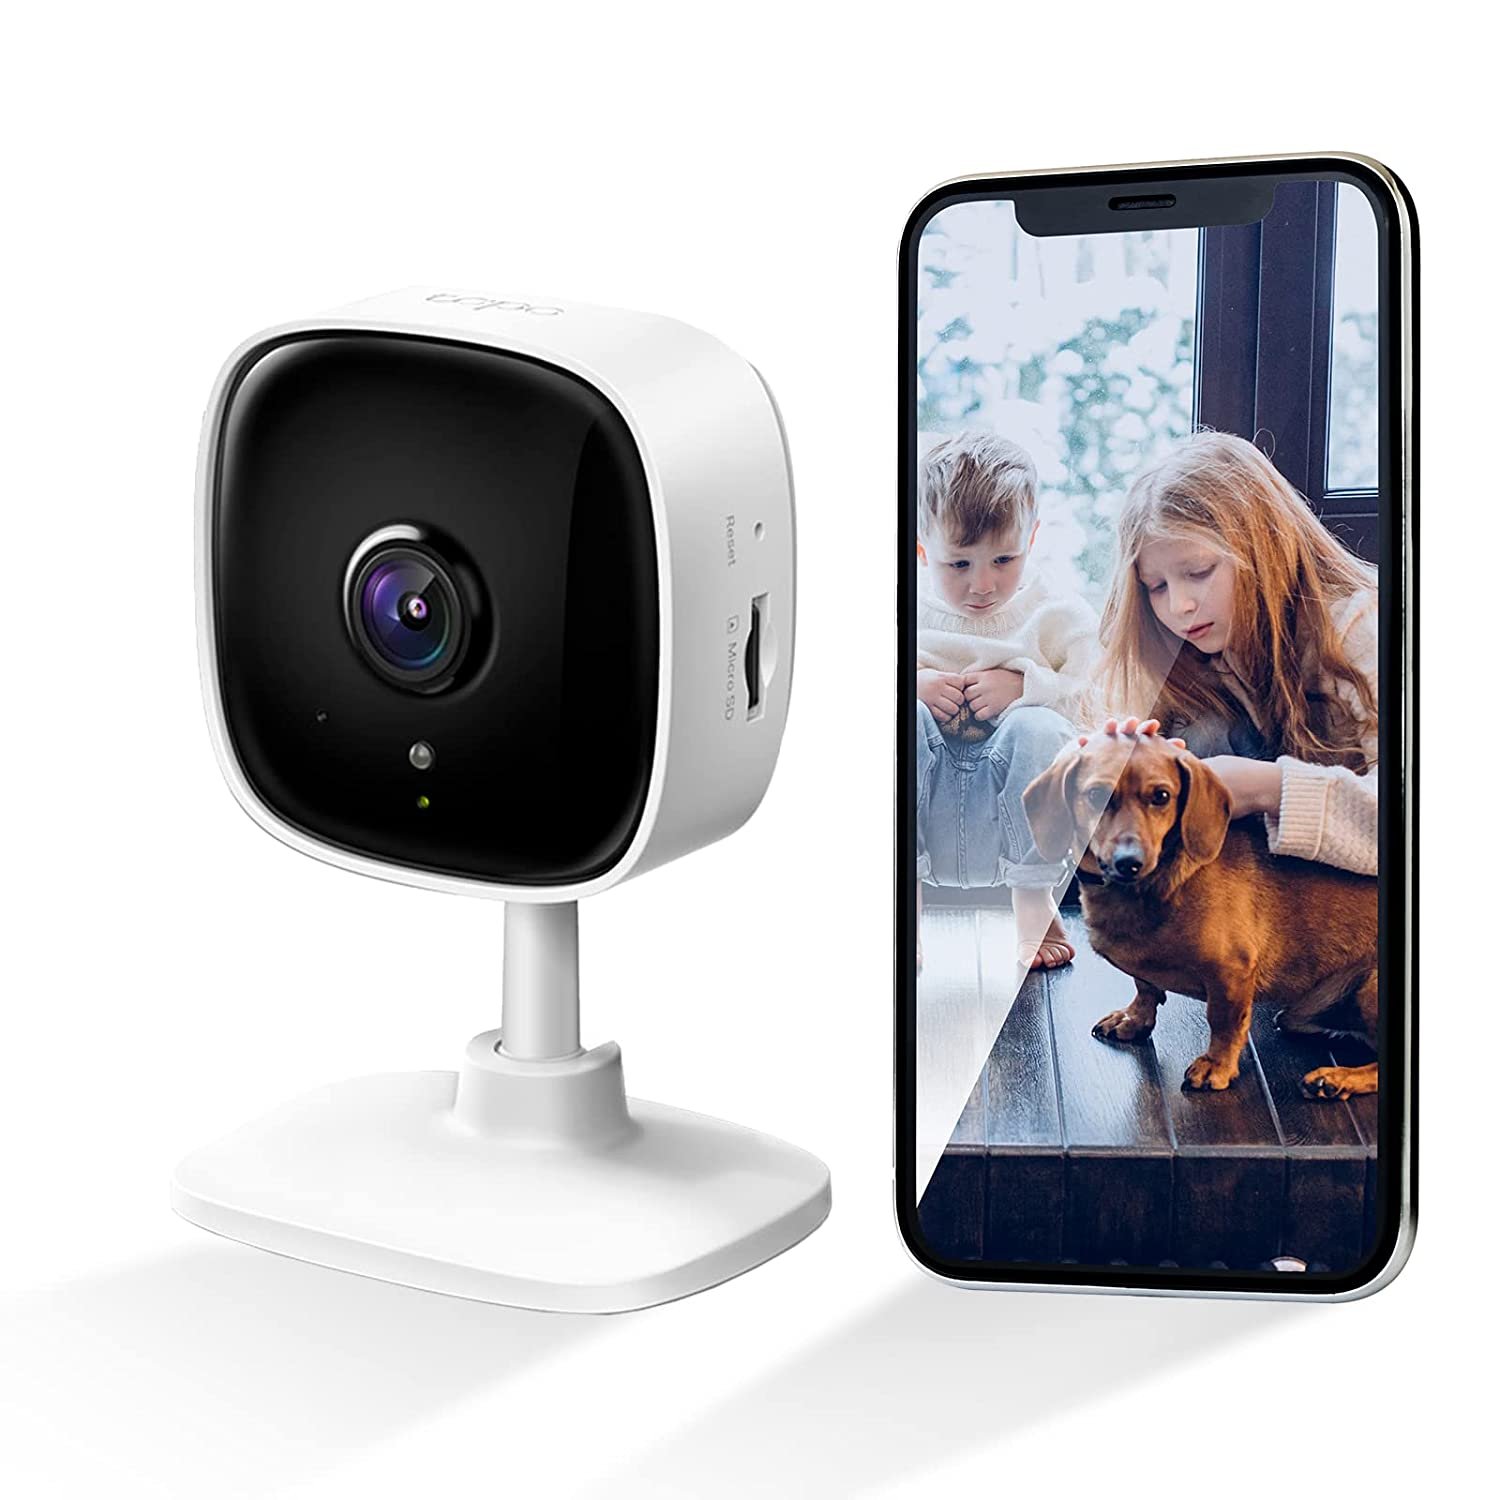 TP-Link Tapo C100 Indoor Home Security Wi-Fi Camera with Night Vision,  1080p High Definition - White